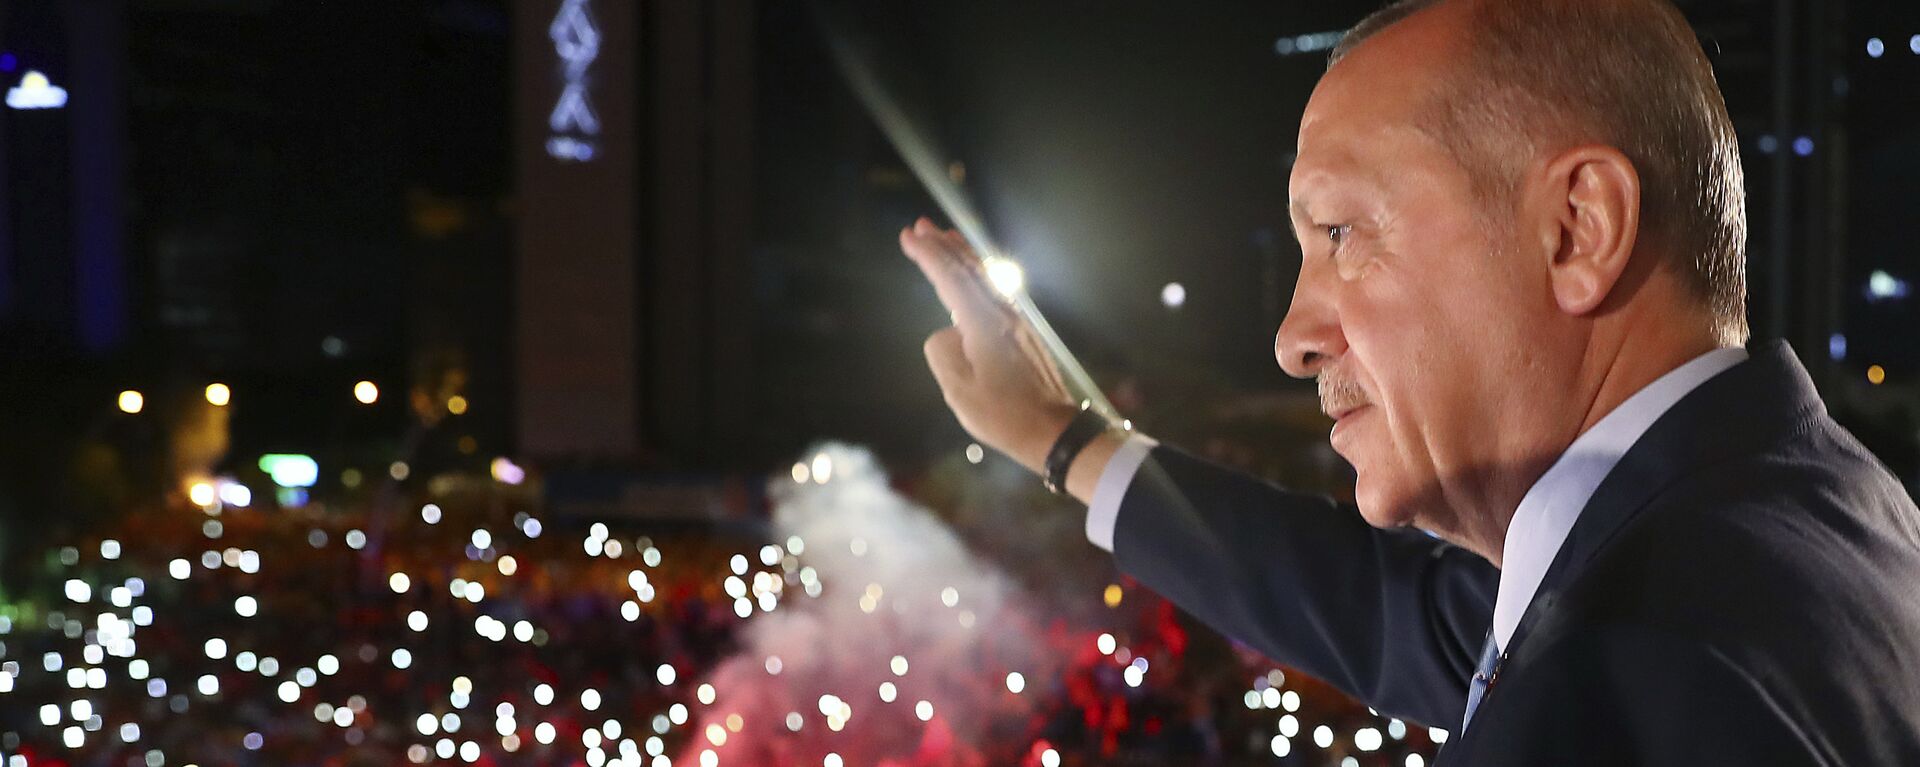 Turkey's President Recep Tayyip Erdogan, waves to supporters of his ruling Justice and Development Party (AKP) in Ankara, Turkey, early Monday, June 25, 2018. Erdogan won Turkey's landmark election Sunday, the country's electoral commission said, ushering in a new system granting the president sweeping new powers which critics say will cement what they call a one-man rule - Sputnik International, 1920, 17.02.2023